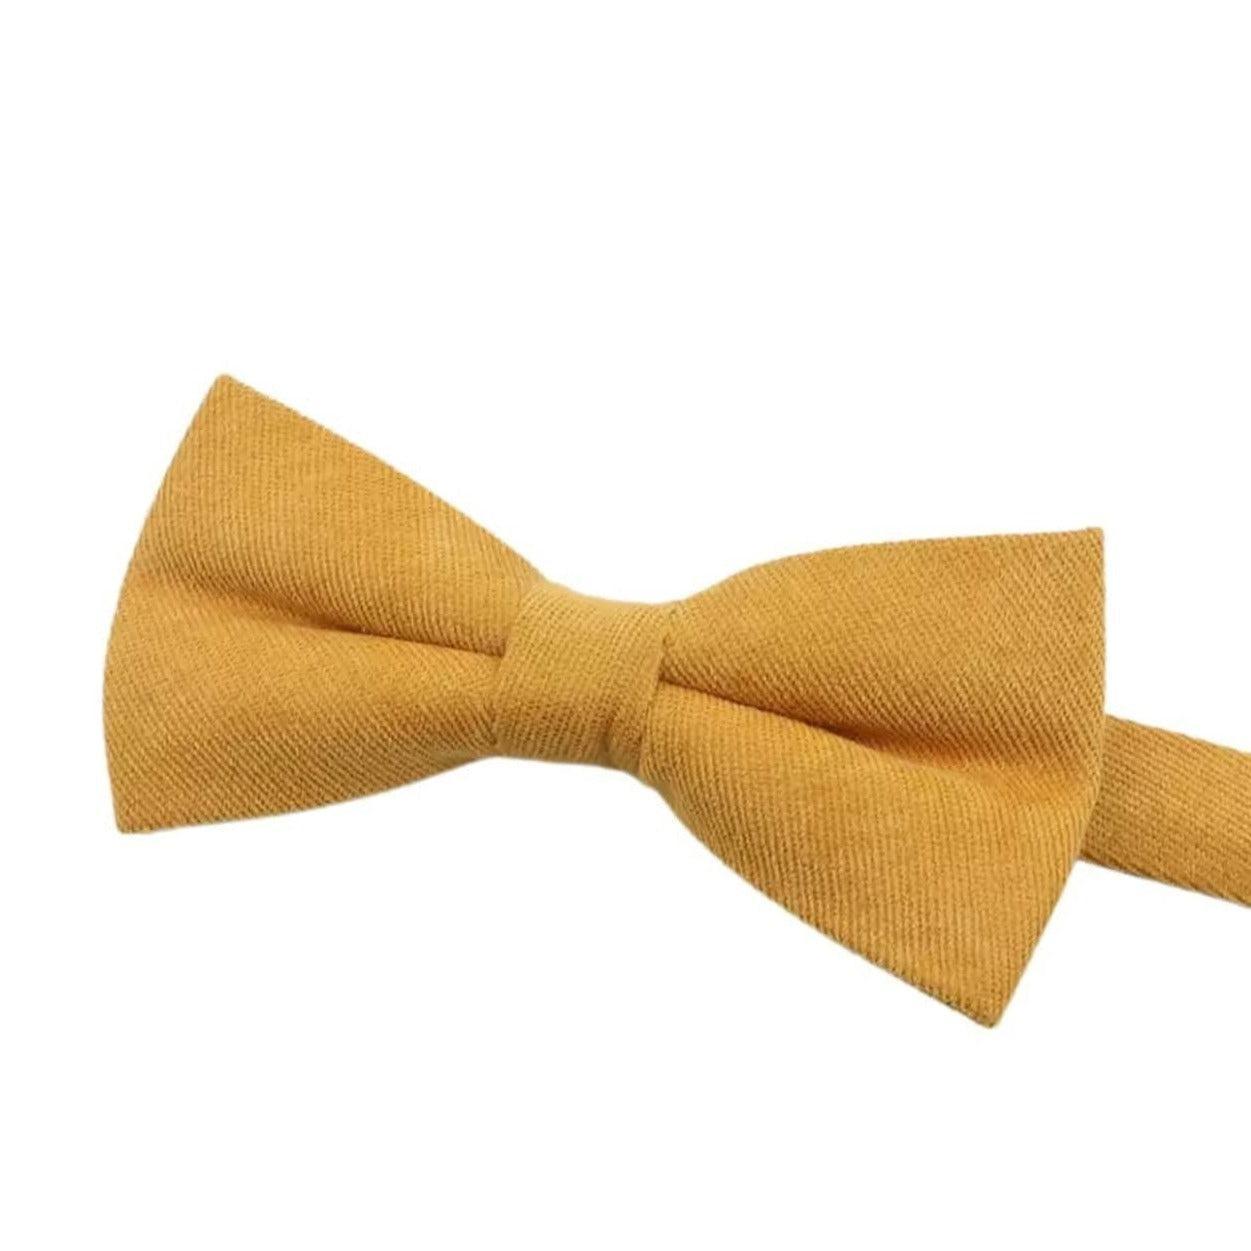 Mustard Yellow Bow tie for Babies and Kids ELLE-Bow Tie 10.5 * 6CMfor toddlersColor: Mustard Yellow Great for: Weddings styled shoots groomsmen gifts prom formal events Ring bearers-Mytieshop